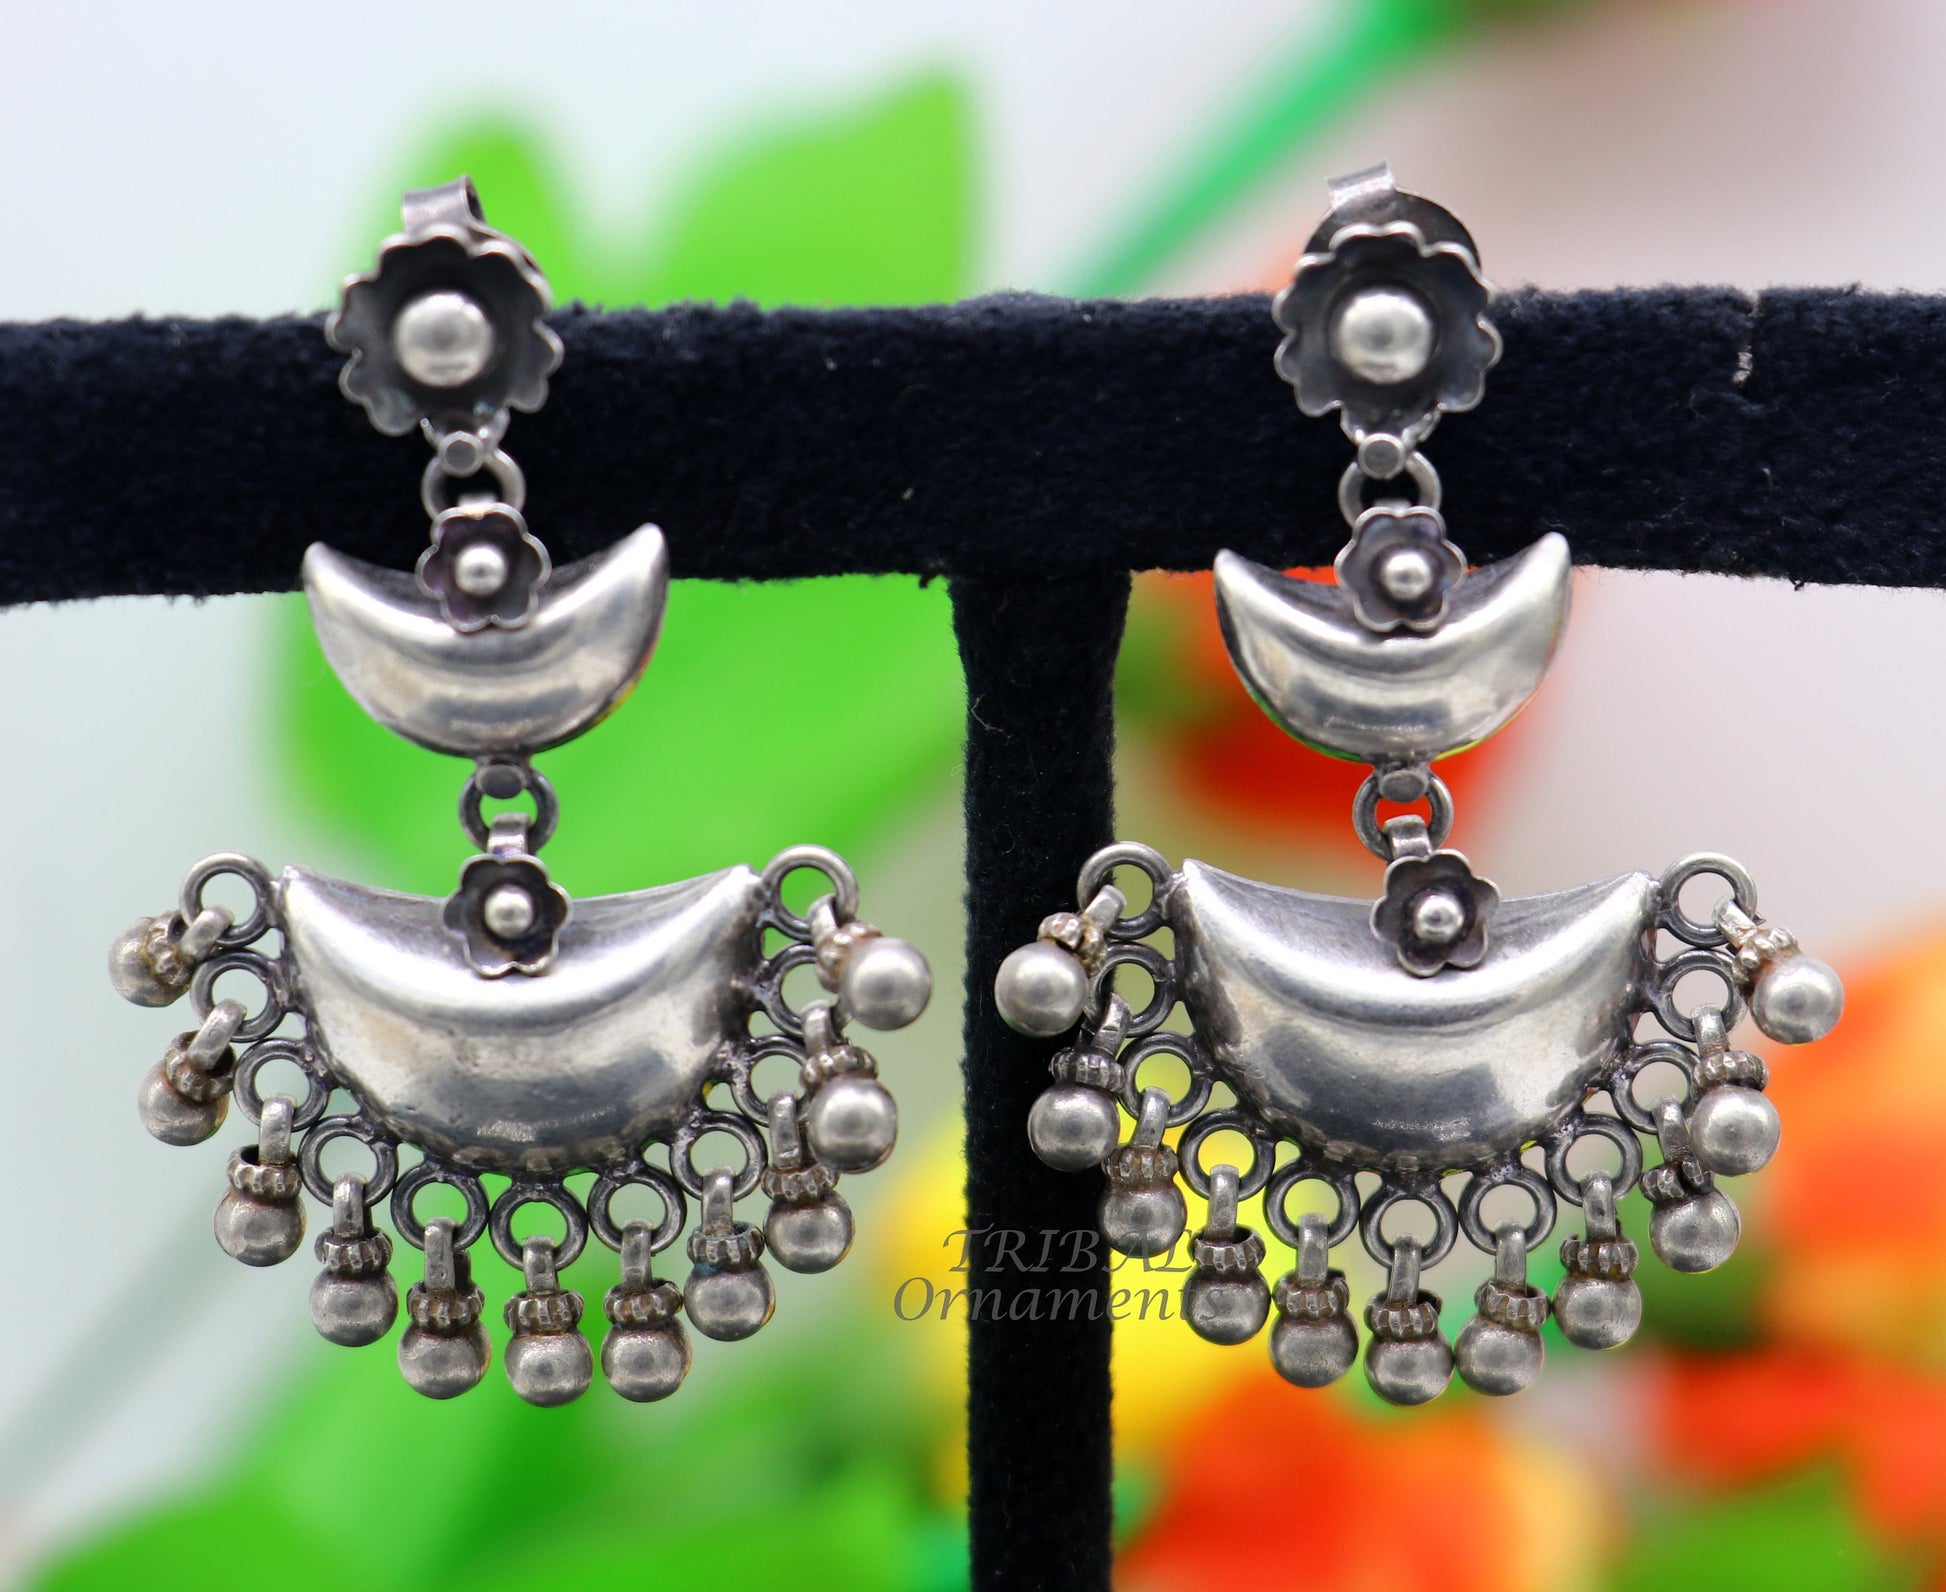 Cultural silver earrings, fashionable and versatile floral silver 3 steps drop dangles ethnic pattern made by 925 sterling silver s1114 - TRIBAL ORNAMENTS